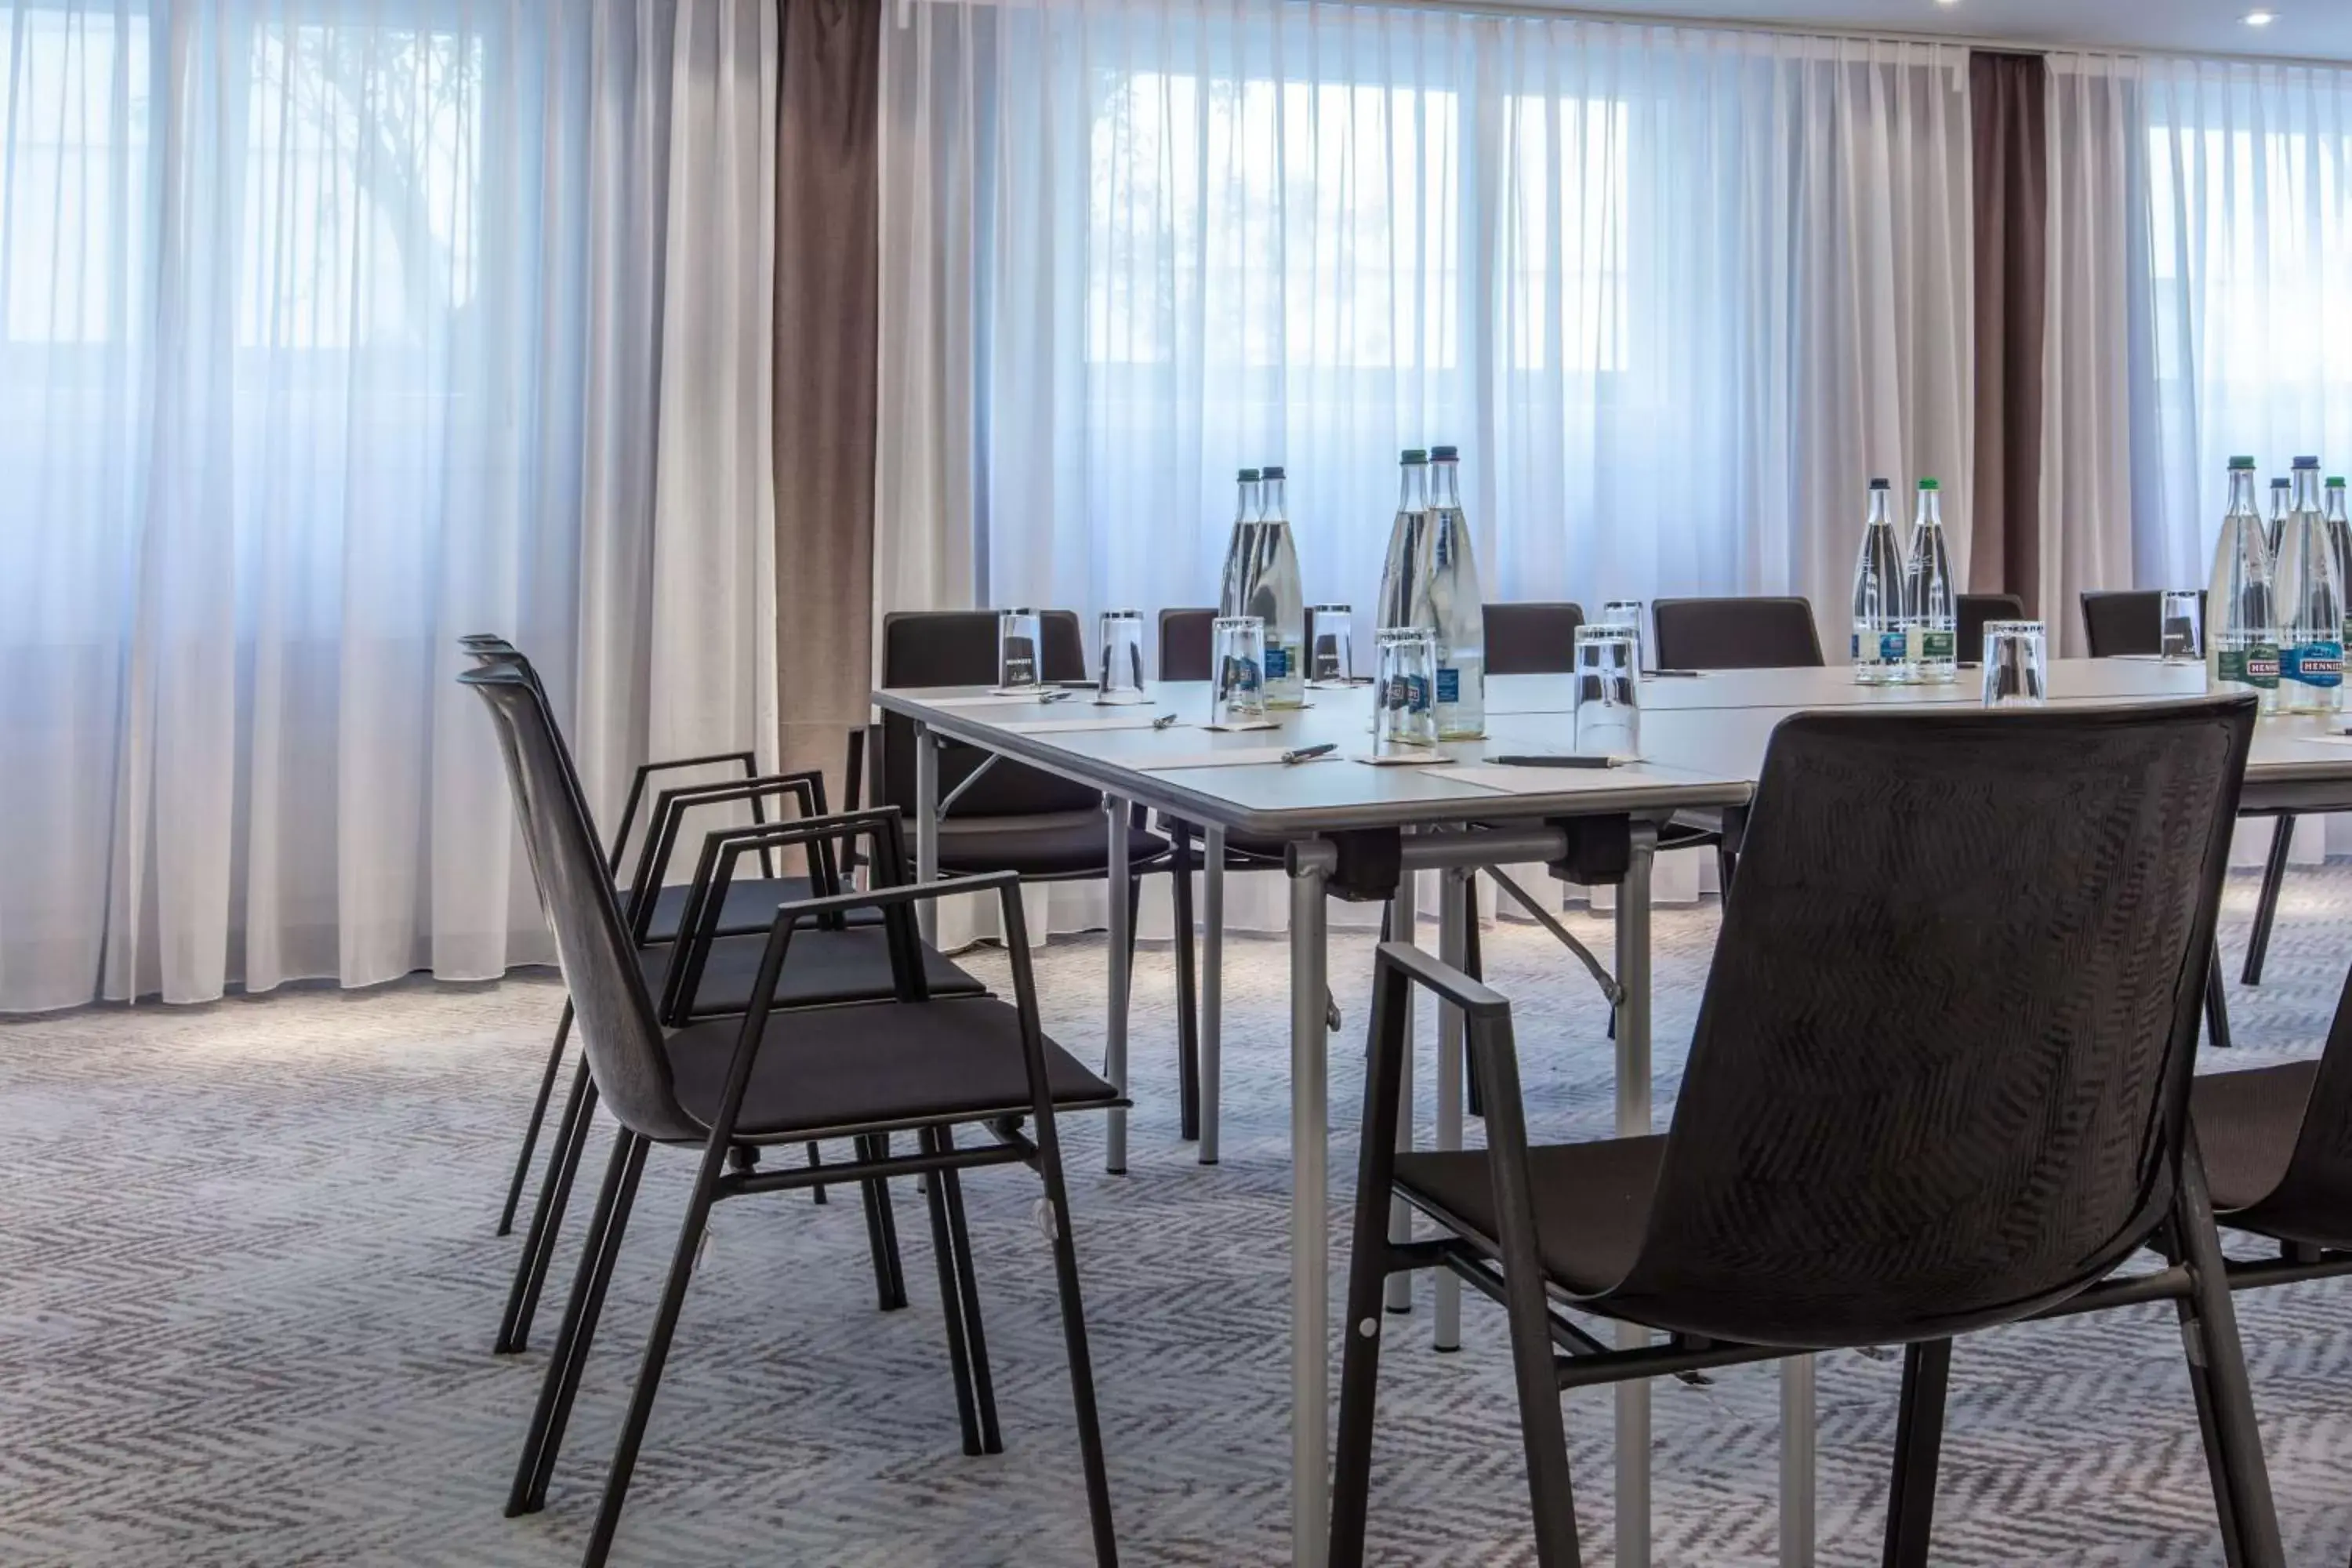 Meeting/conference room in Radisson Blu, Basel